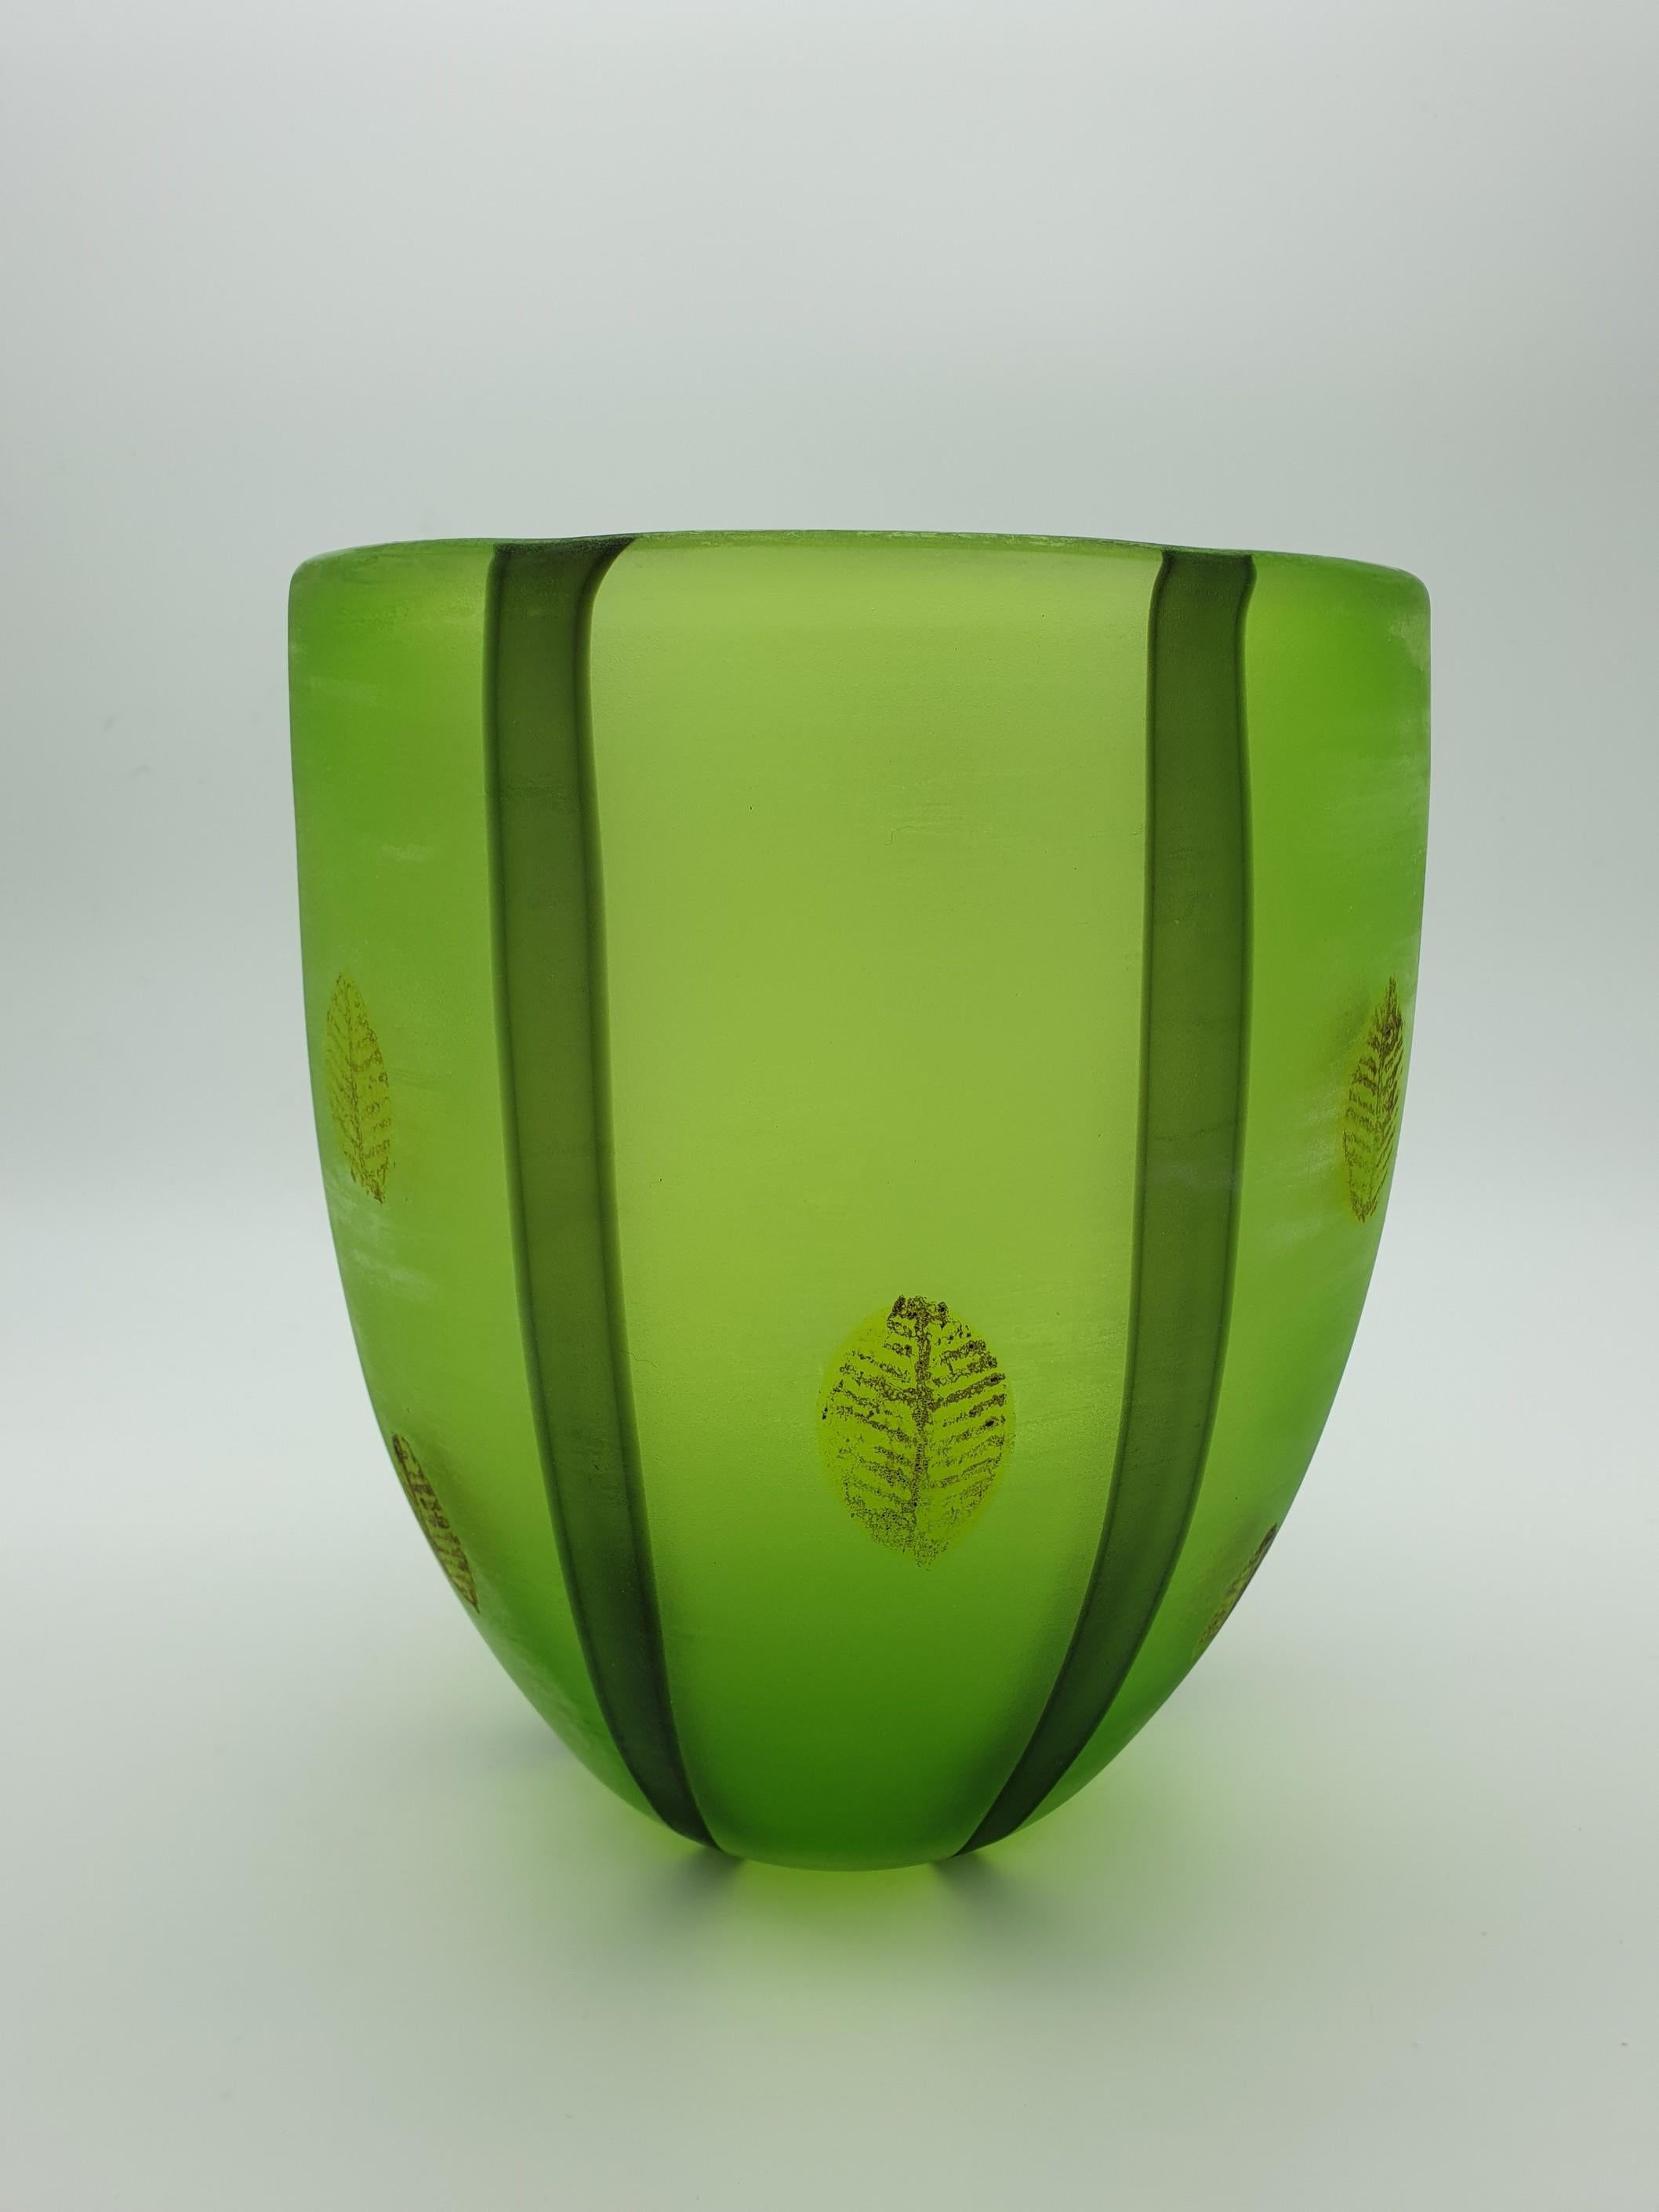 Large green vase with circular cross section 